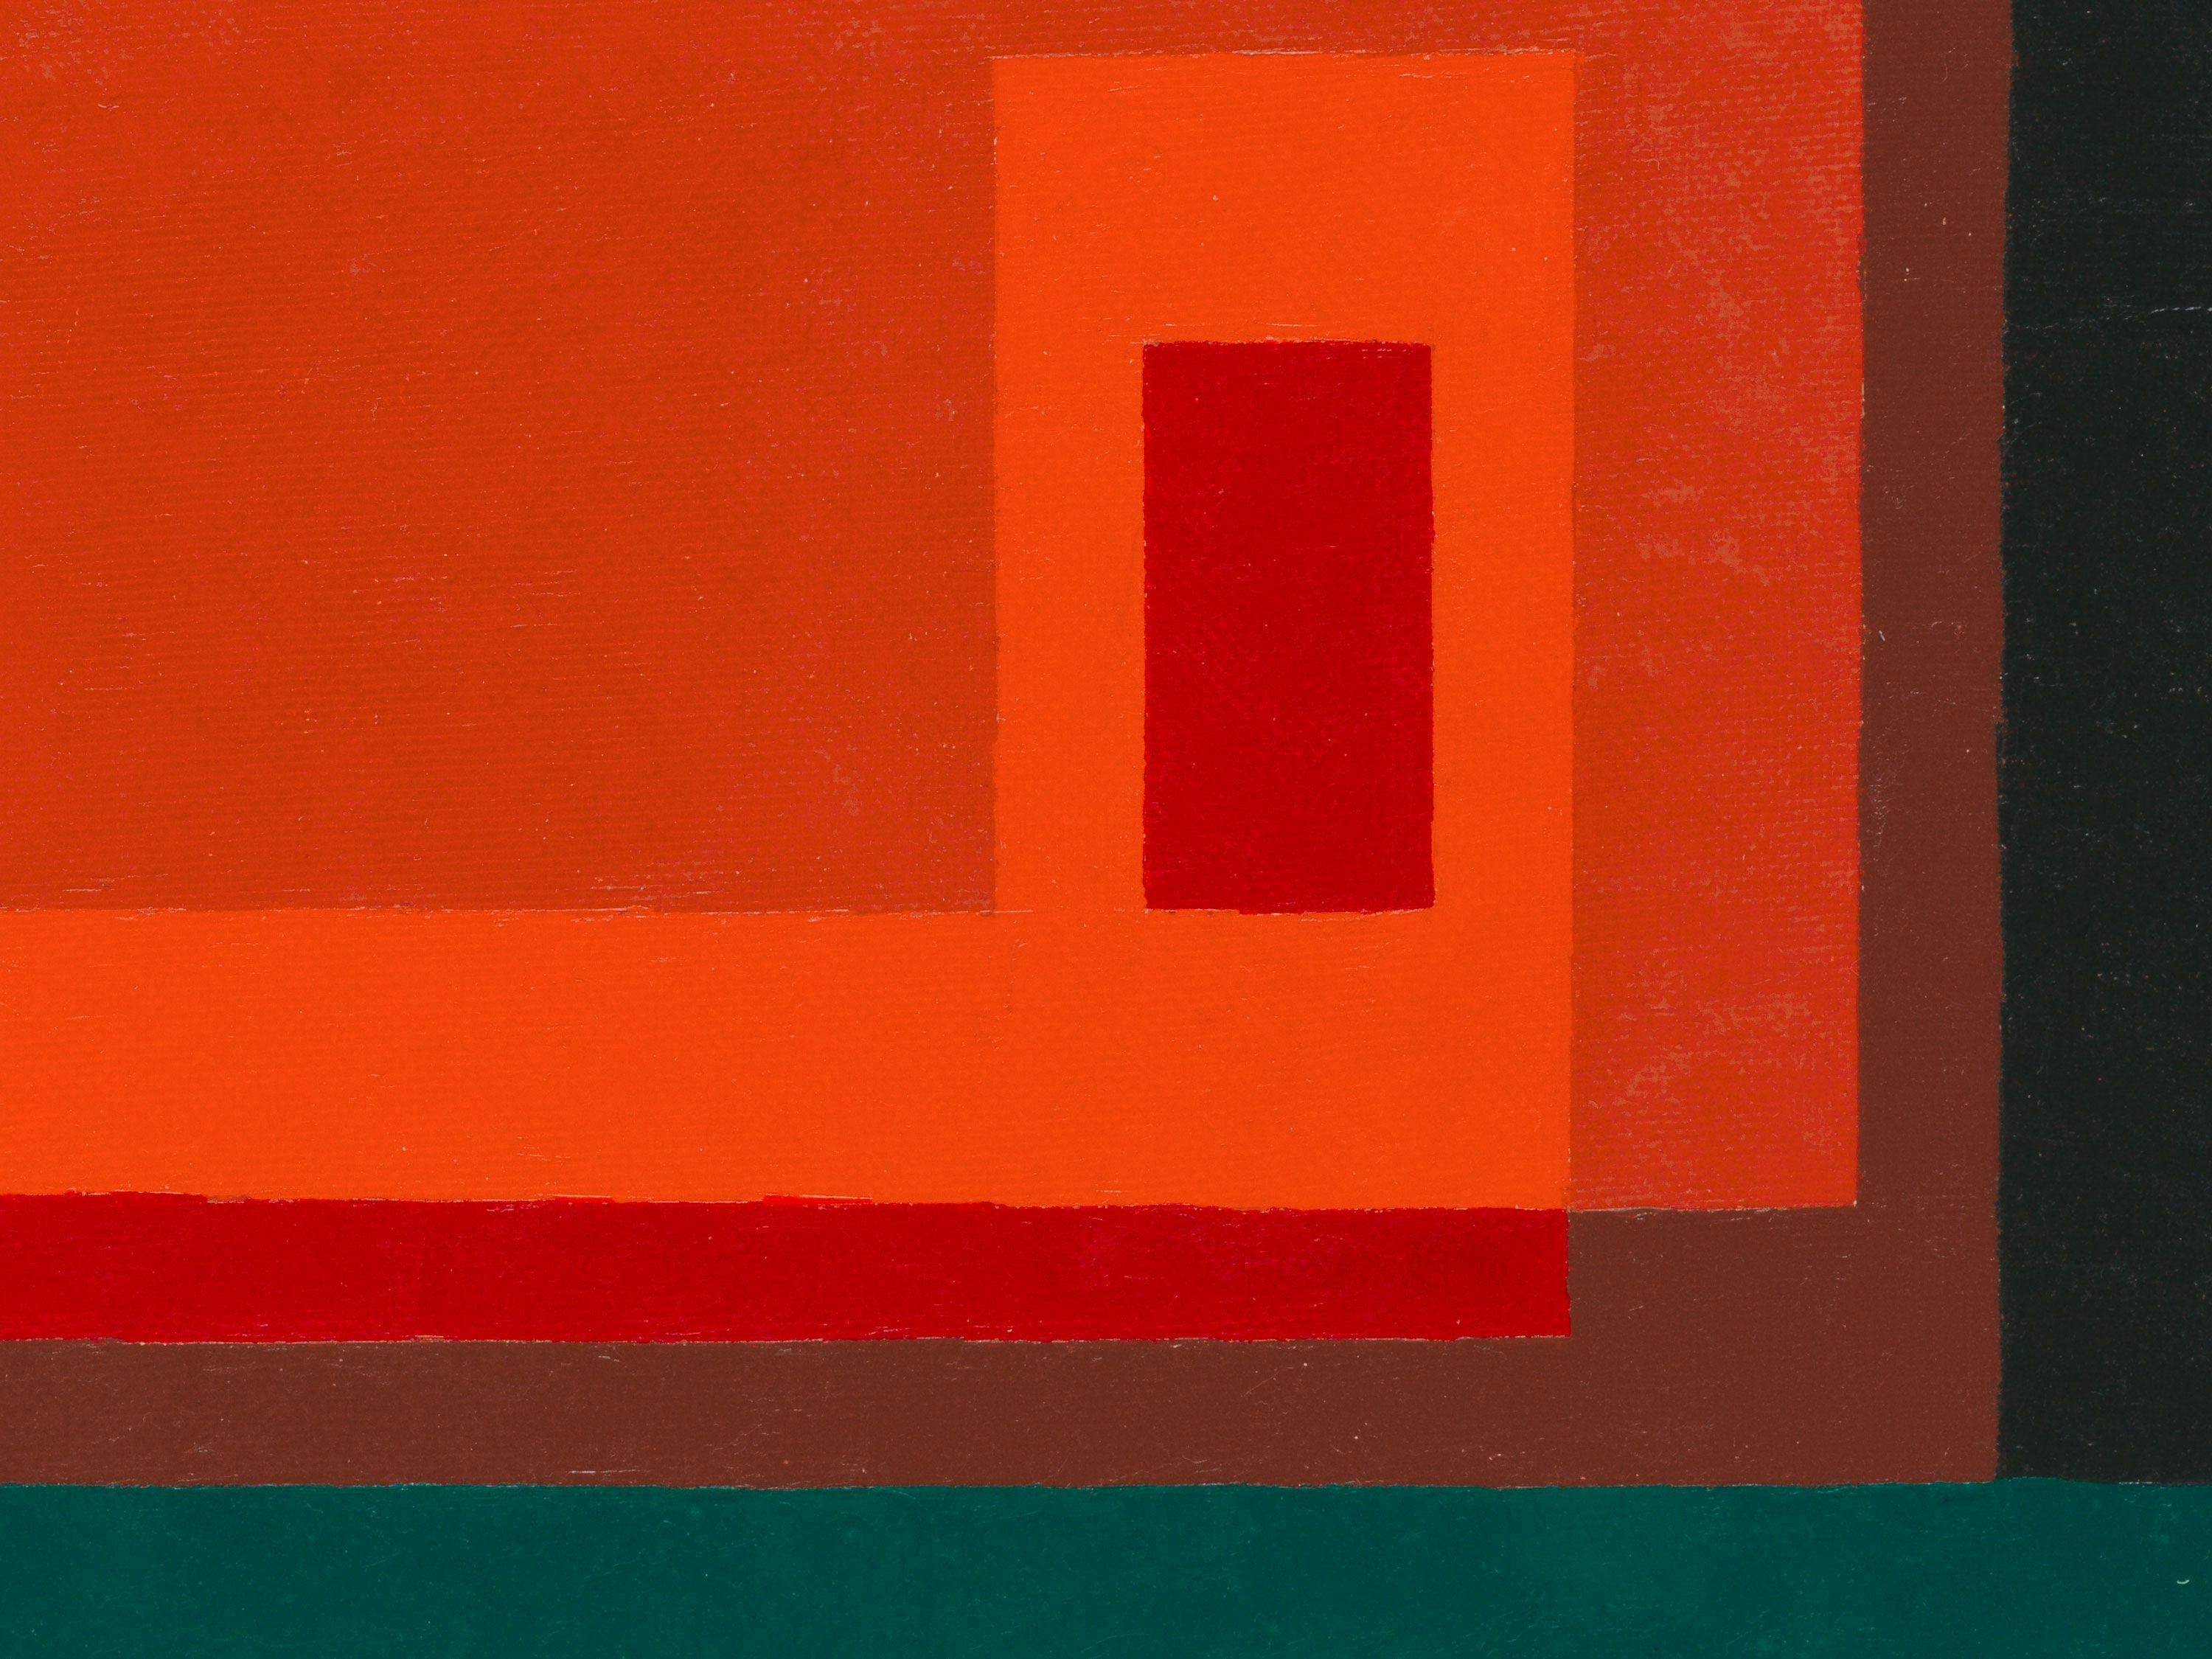 A detail from a painting by Josef Albers, titled On the Other Side, dated 1952.